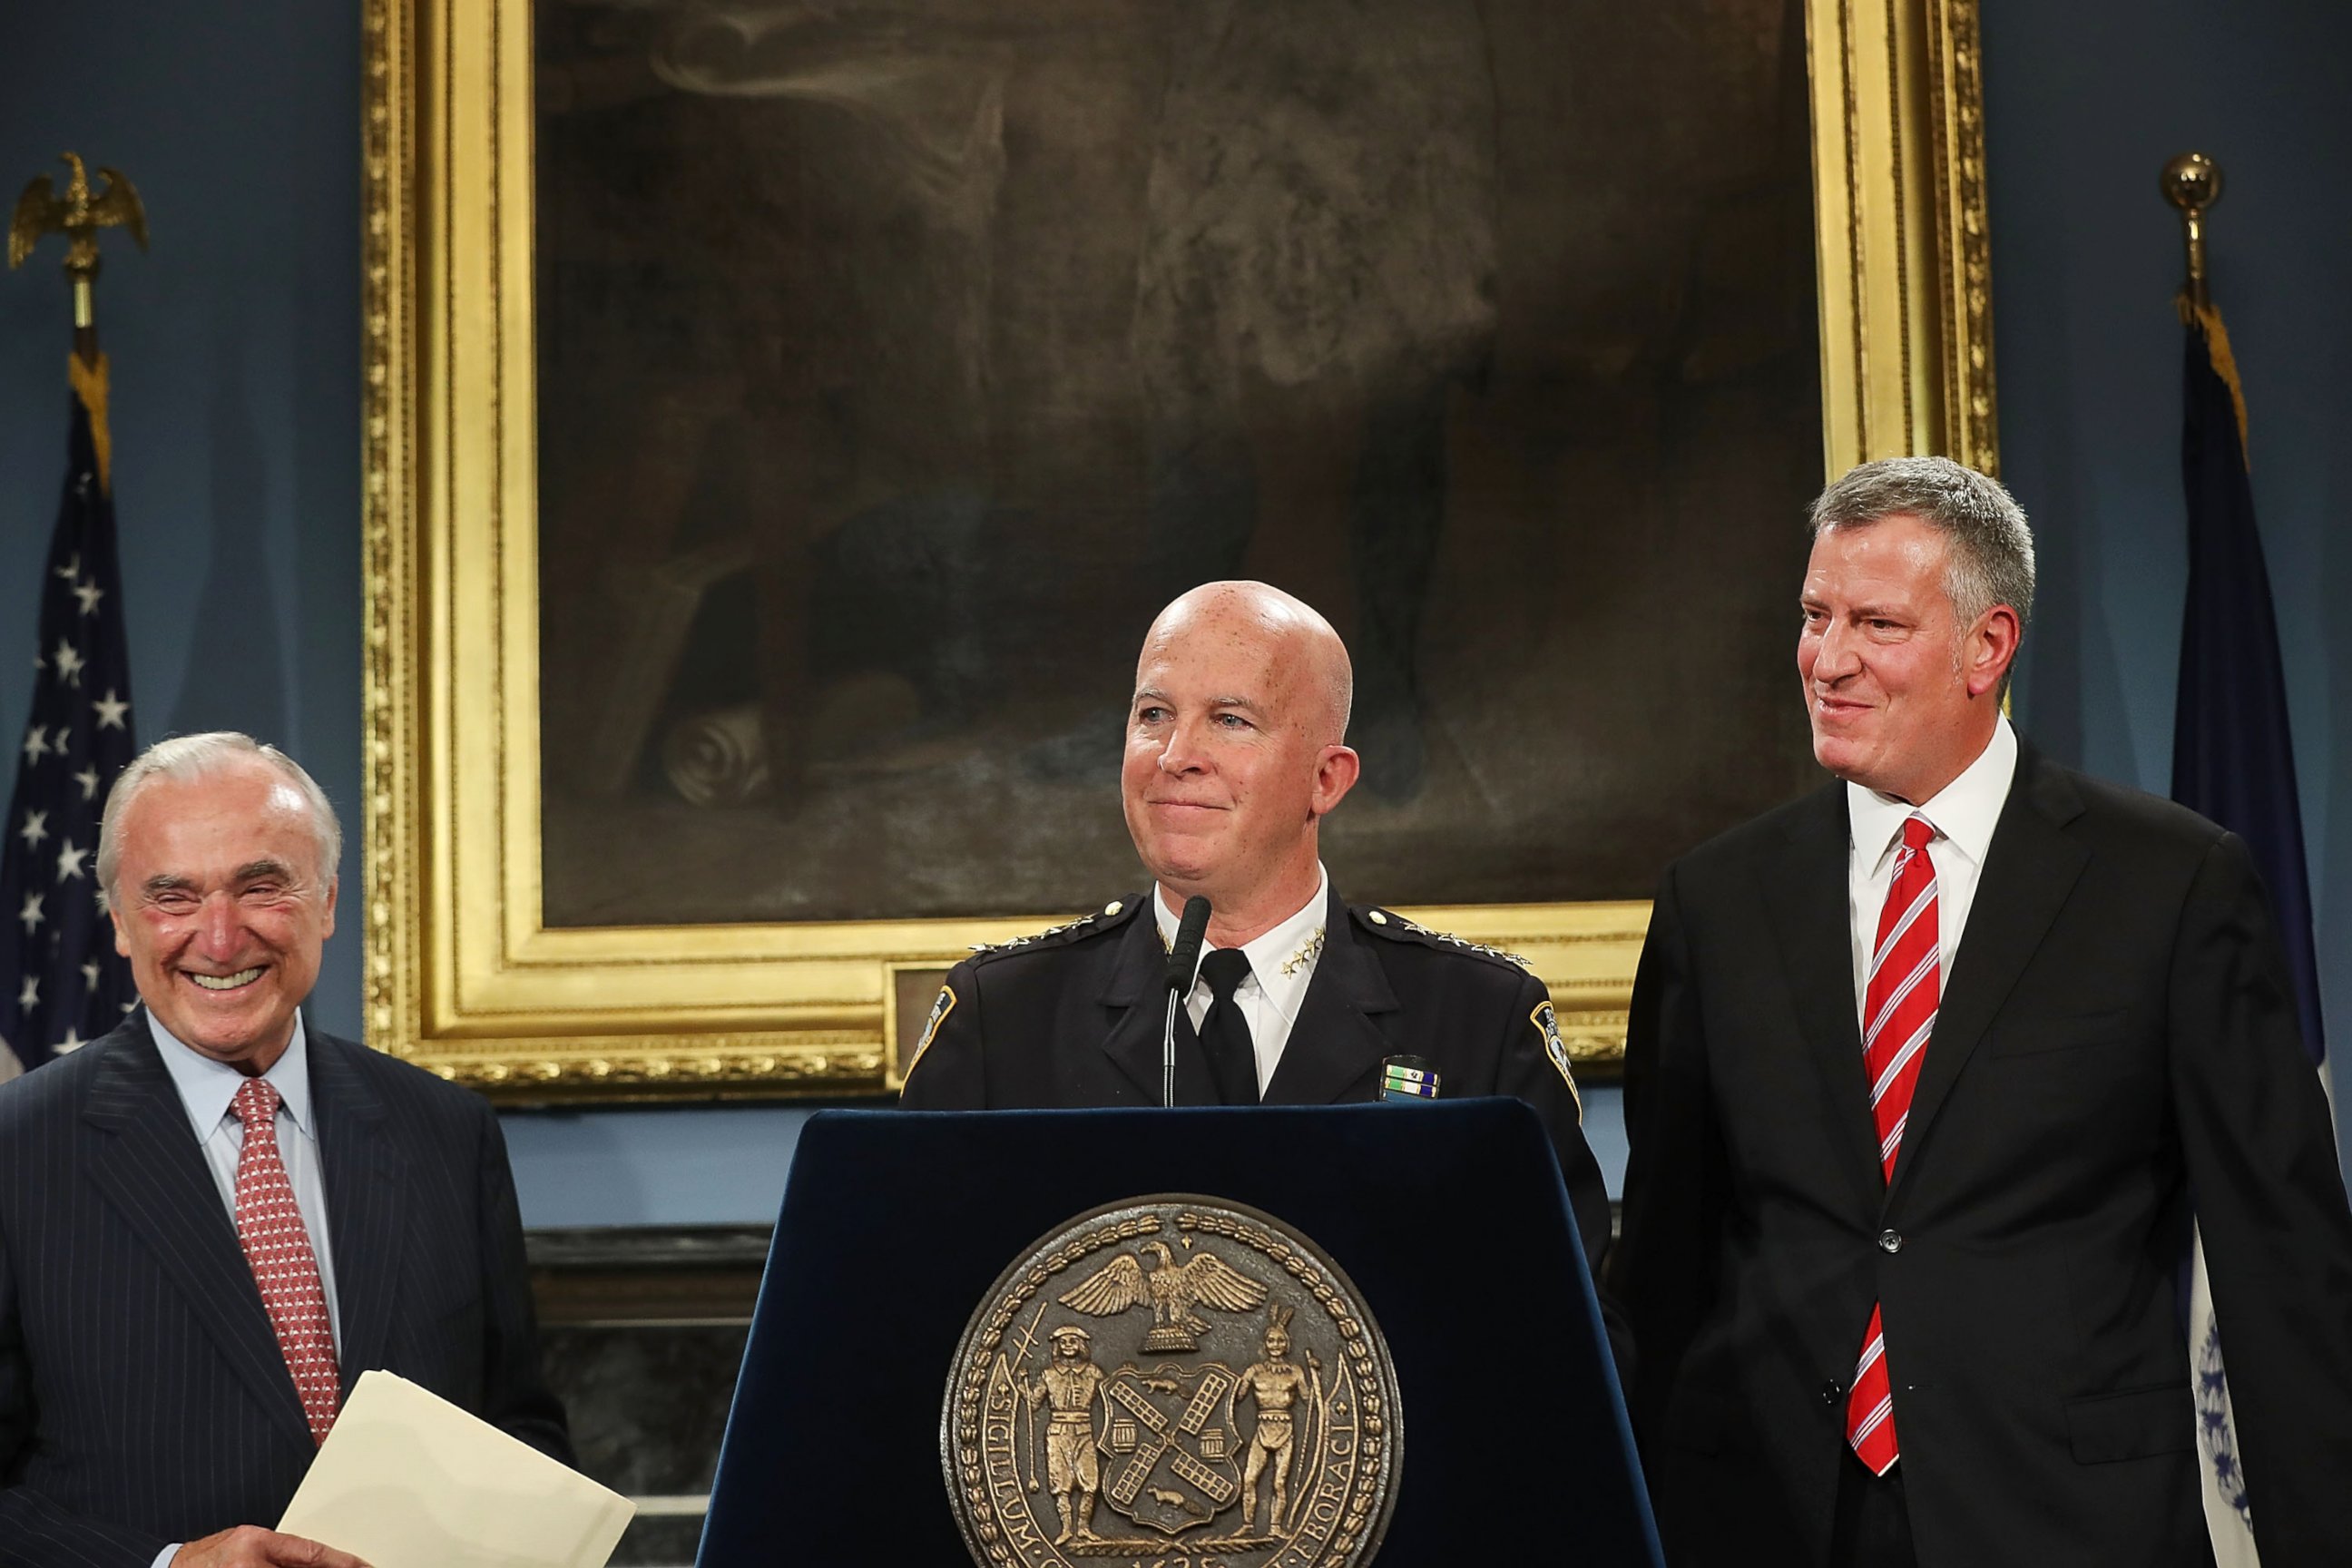 PHOTO:Chief of the New York City Police Department Department James O'Neill stands with New York City Police Commissioner Bill Bratton (left) and Mayor Bill de Blasio at a news conference on Aug. 2, 2016 in New York.